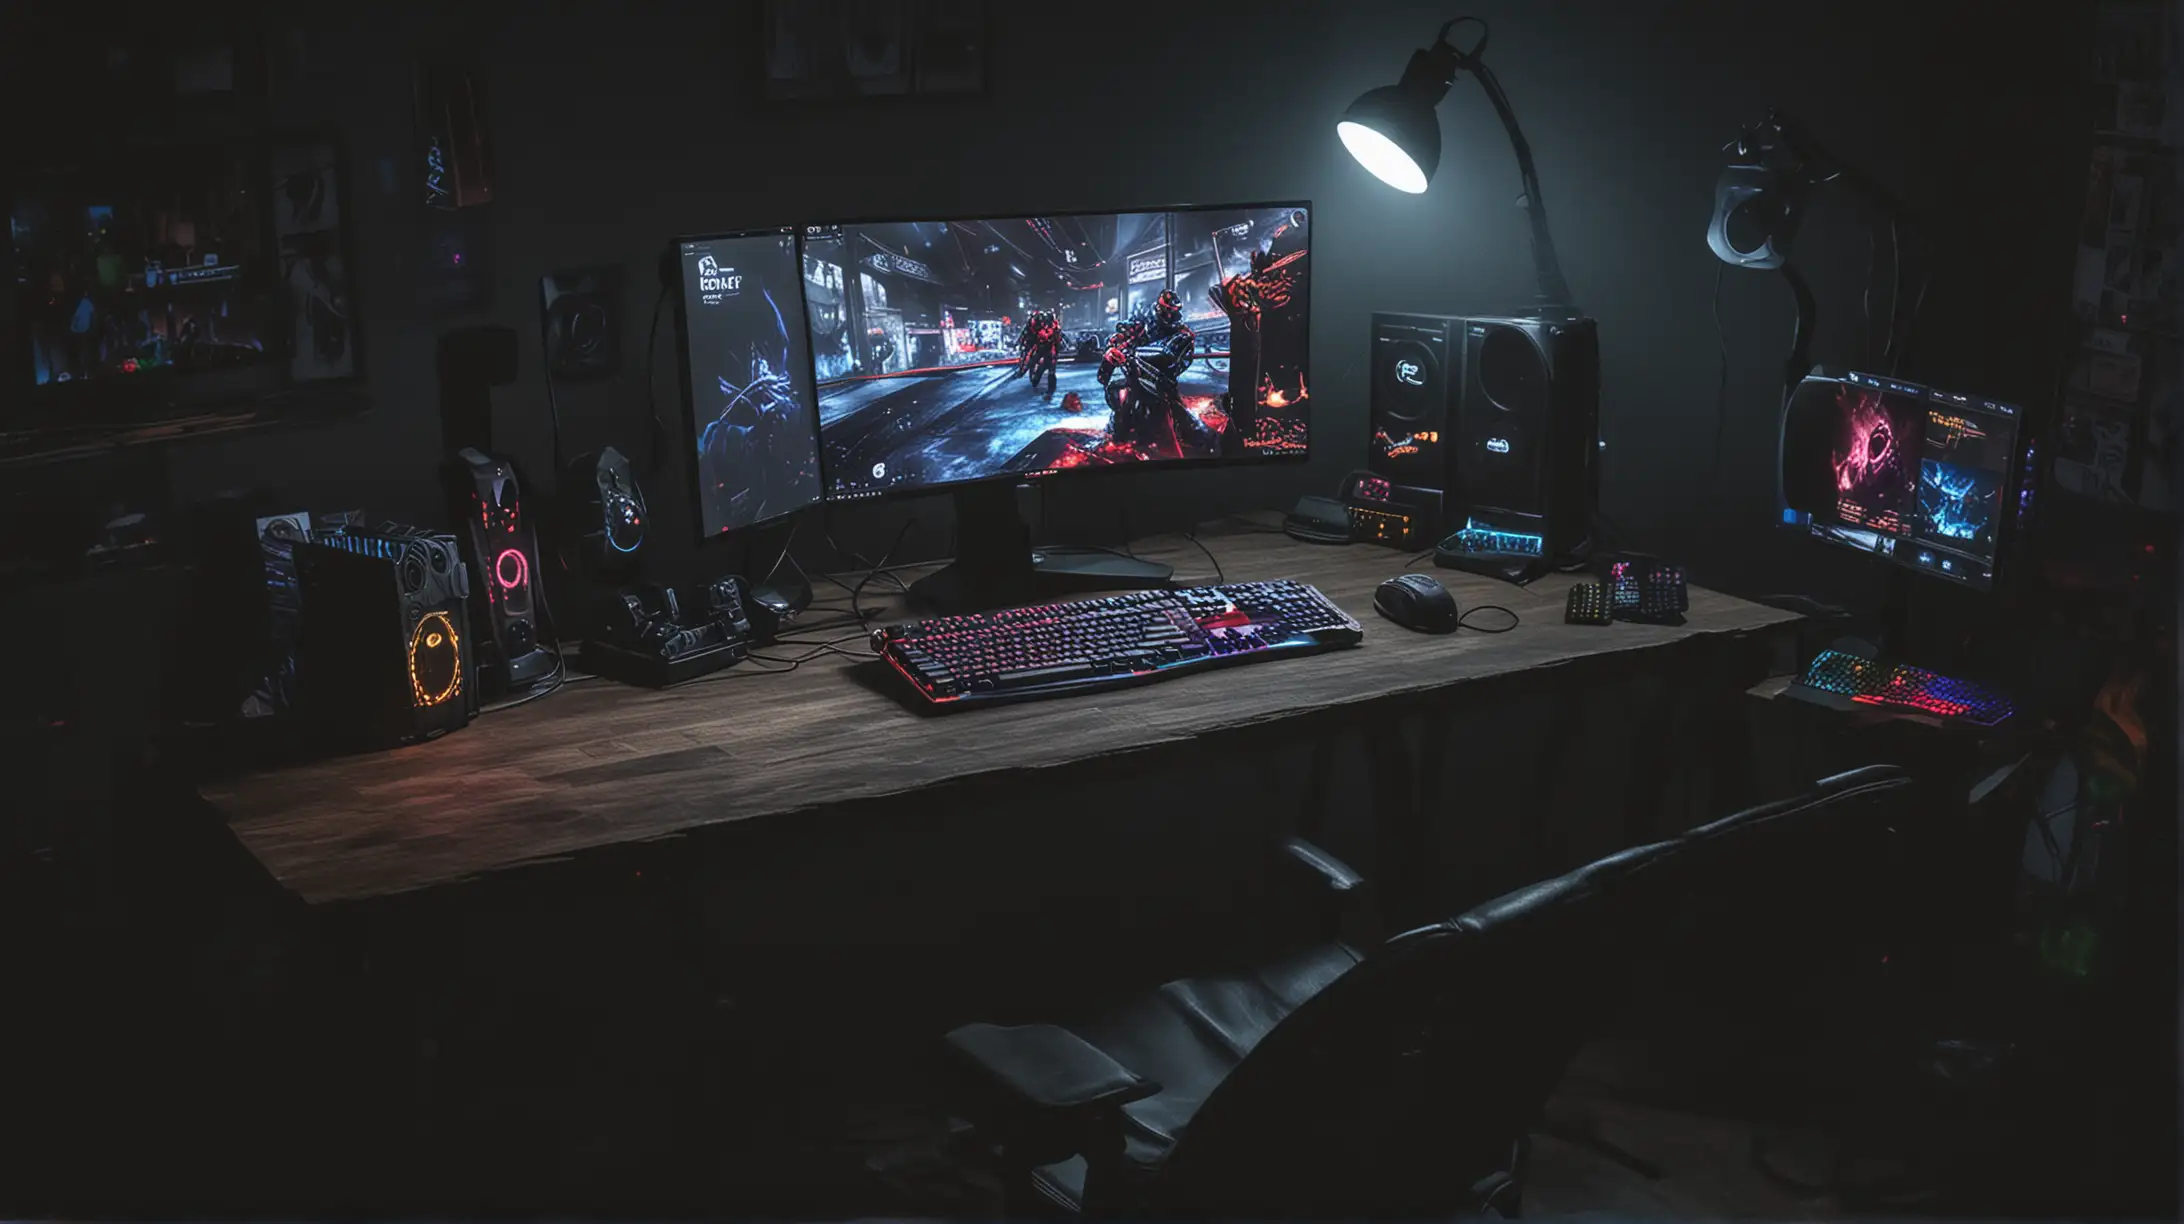 Create a picture in a dark room. The view should be directed towards a desk with a desk chair. The focus is on an RGB illuminated gaming keyboard. The setup should show several screens on which games can be seen and a chat. Apart from the screens, the PC and the illuminated keyboard and mouse, there should be a maximum of artificial indirect light.